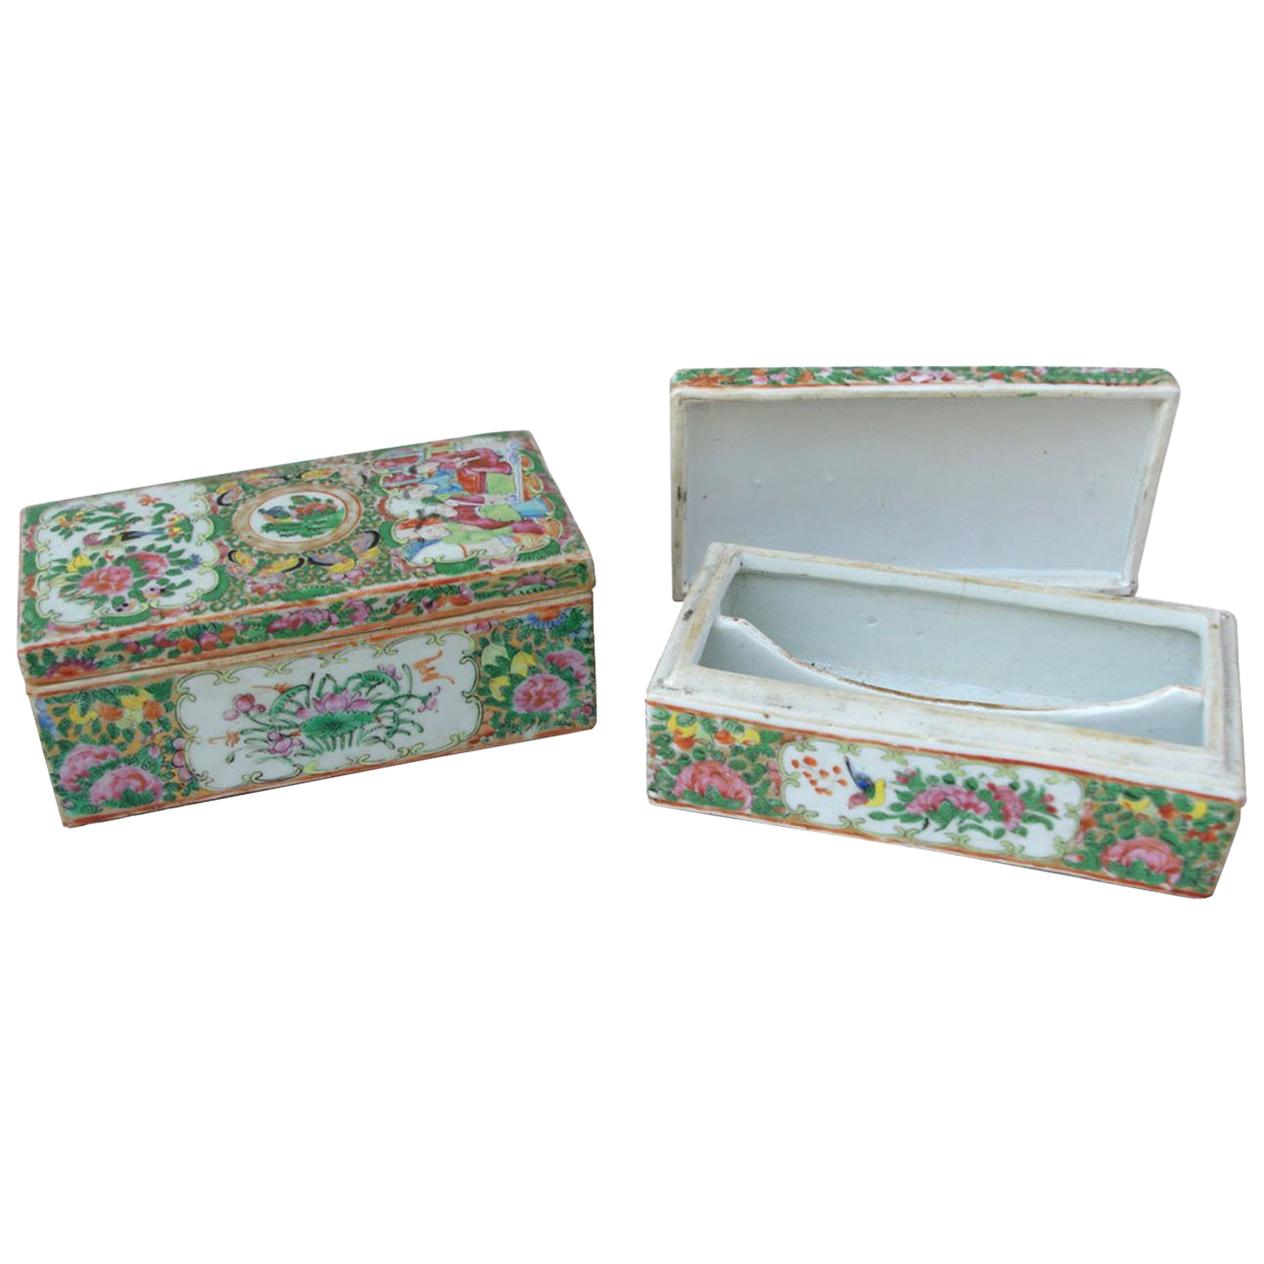 Pair of Canton Porcelain Boxes, 1900 Period For Sale